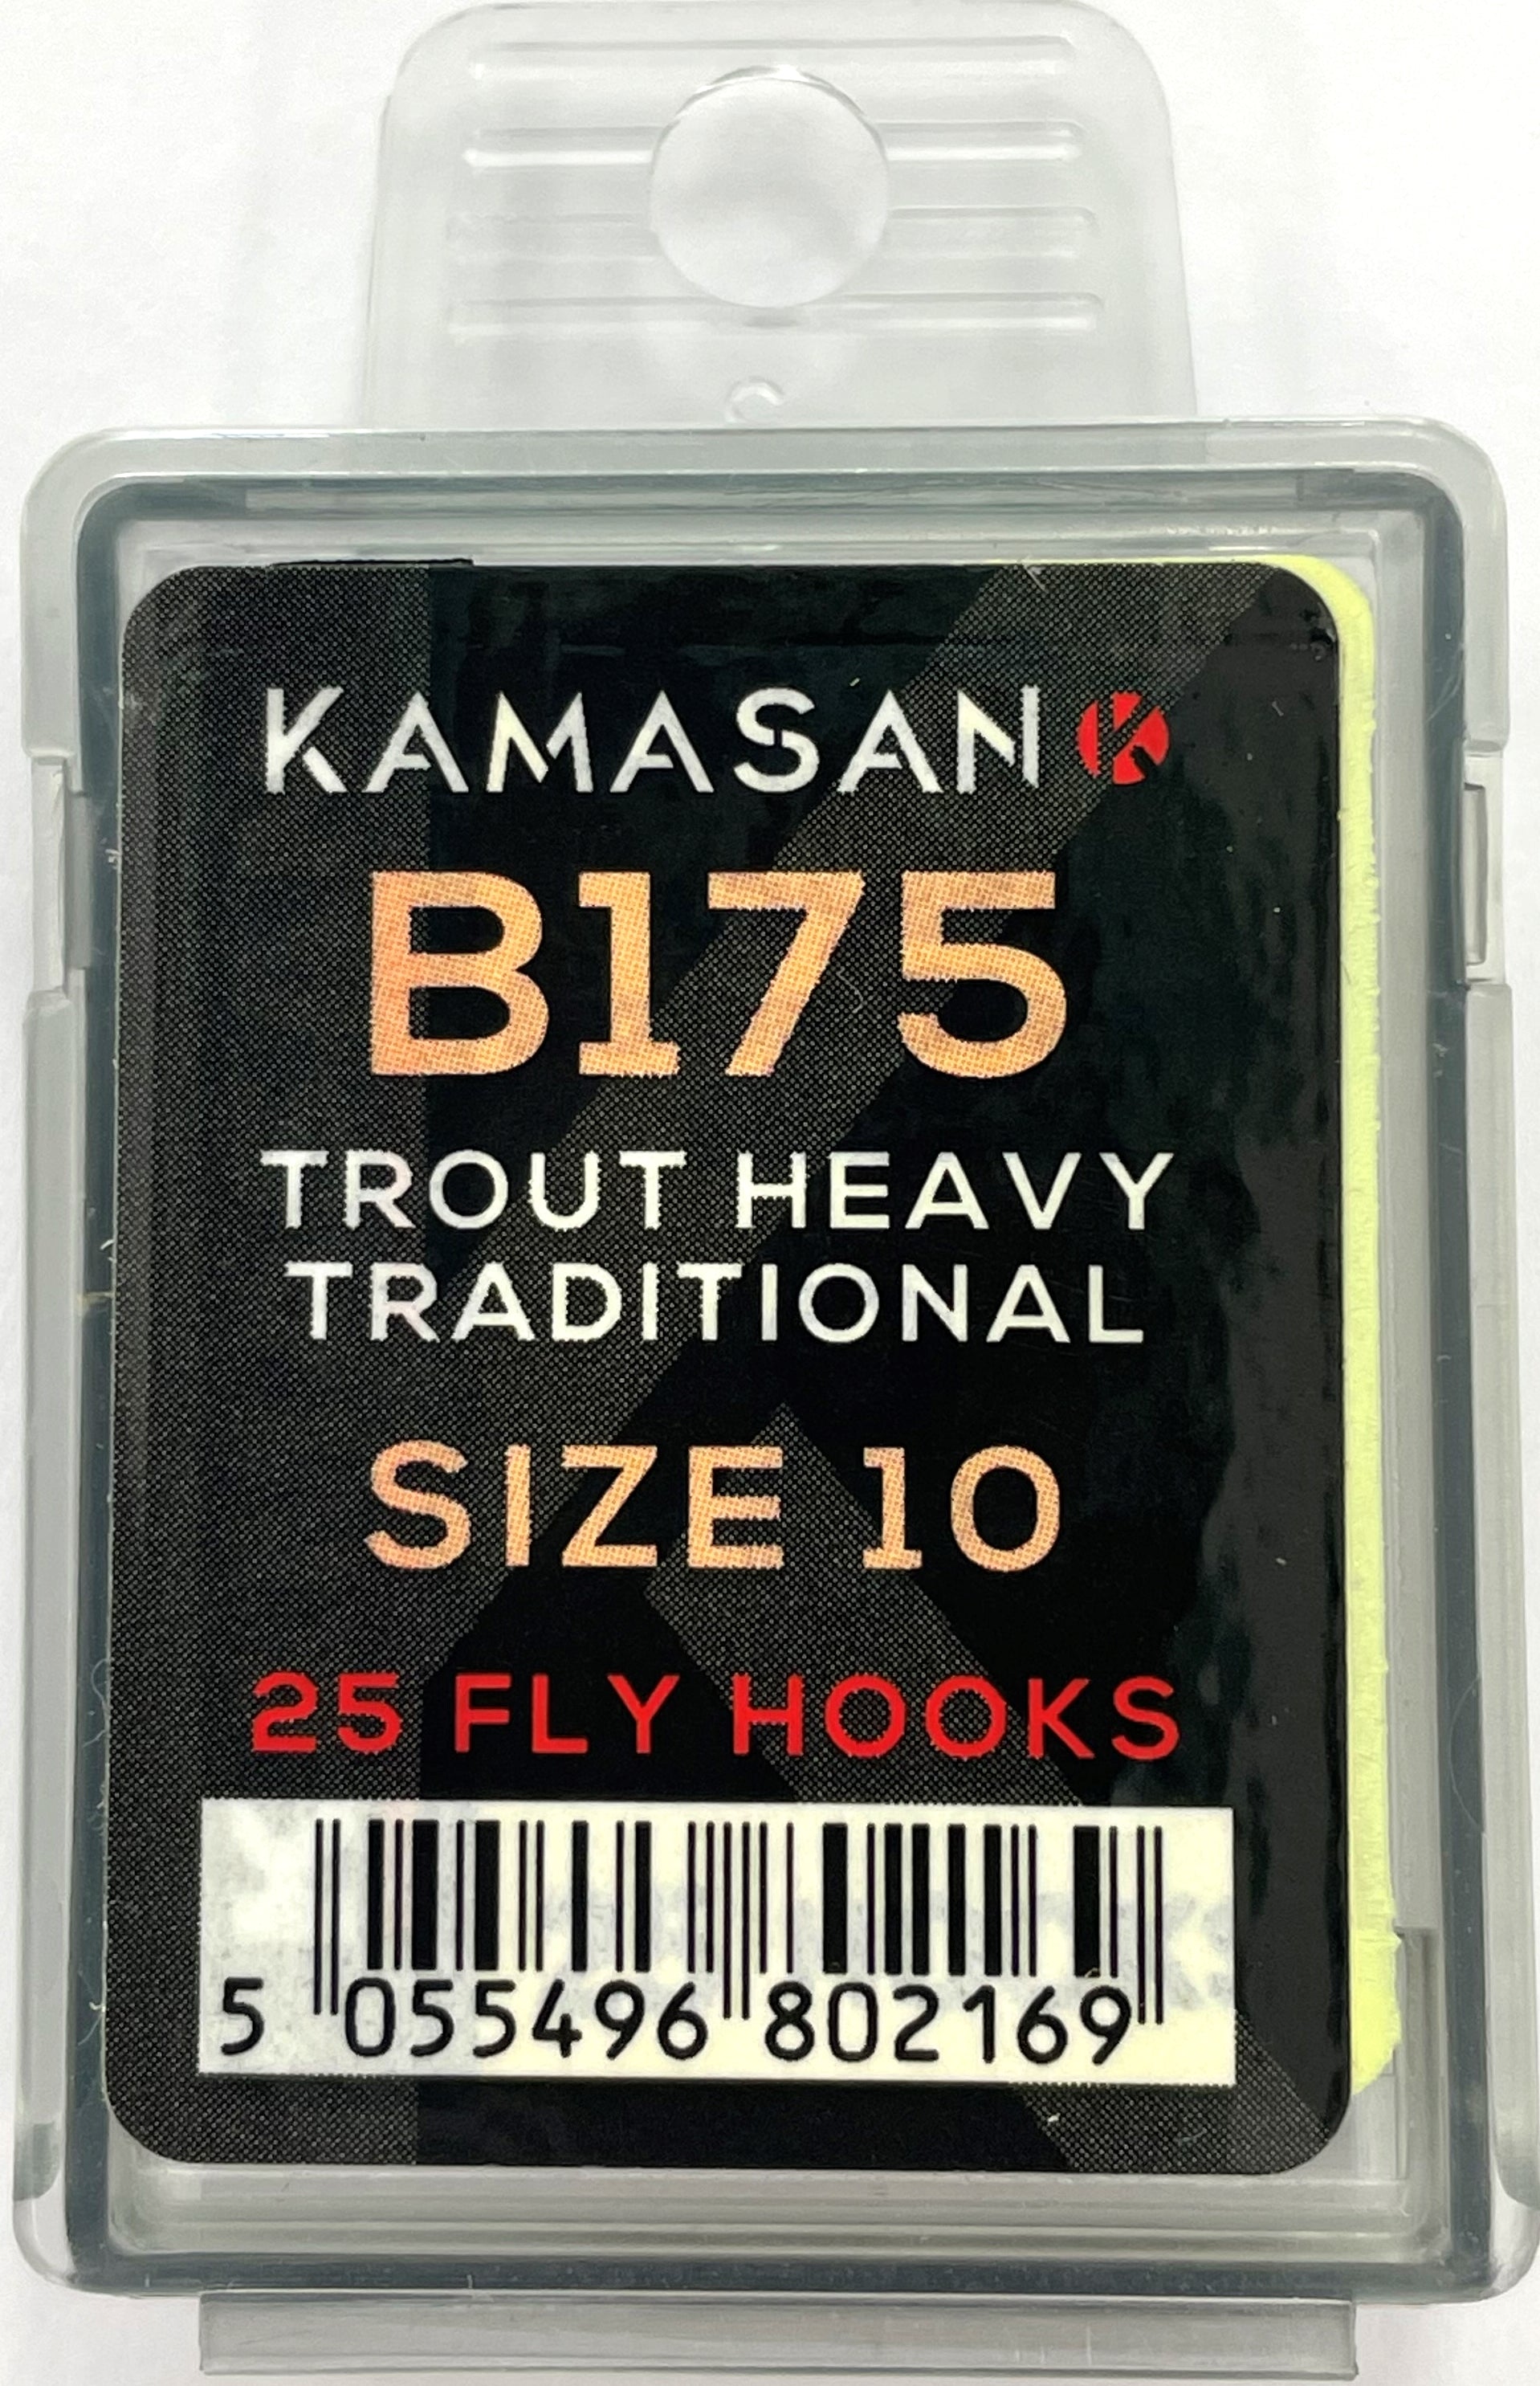 Kamasan B175 Trout Heavy Traditional Fly Hooks (Size 10) – Trophy Trout  Lures and Fly Fishing